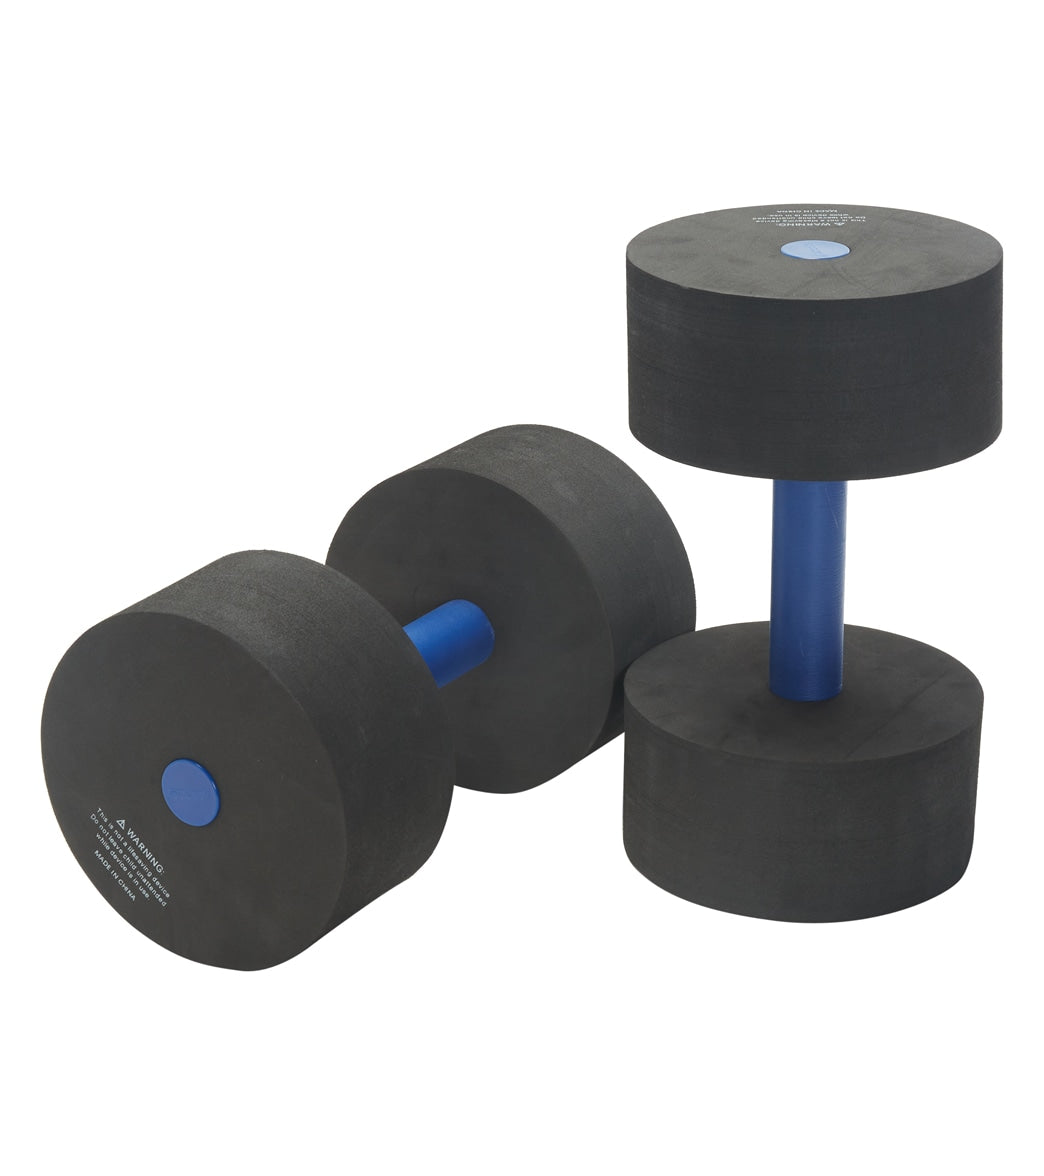 Sporti Aquatic Fitness Heavy Dumbbells Water Weights at SwimOutlet.com